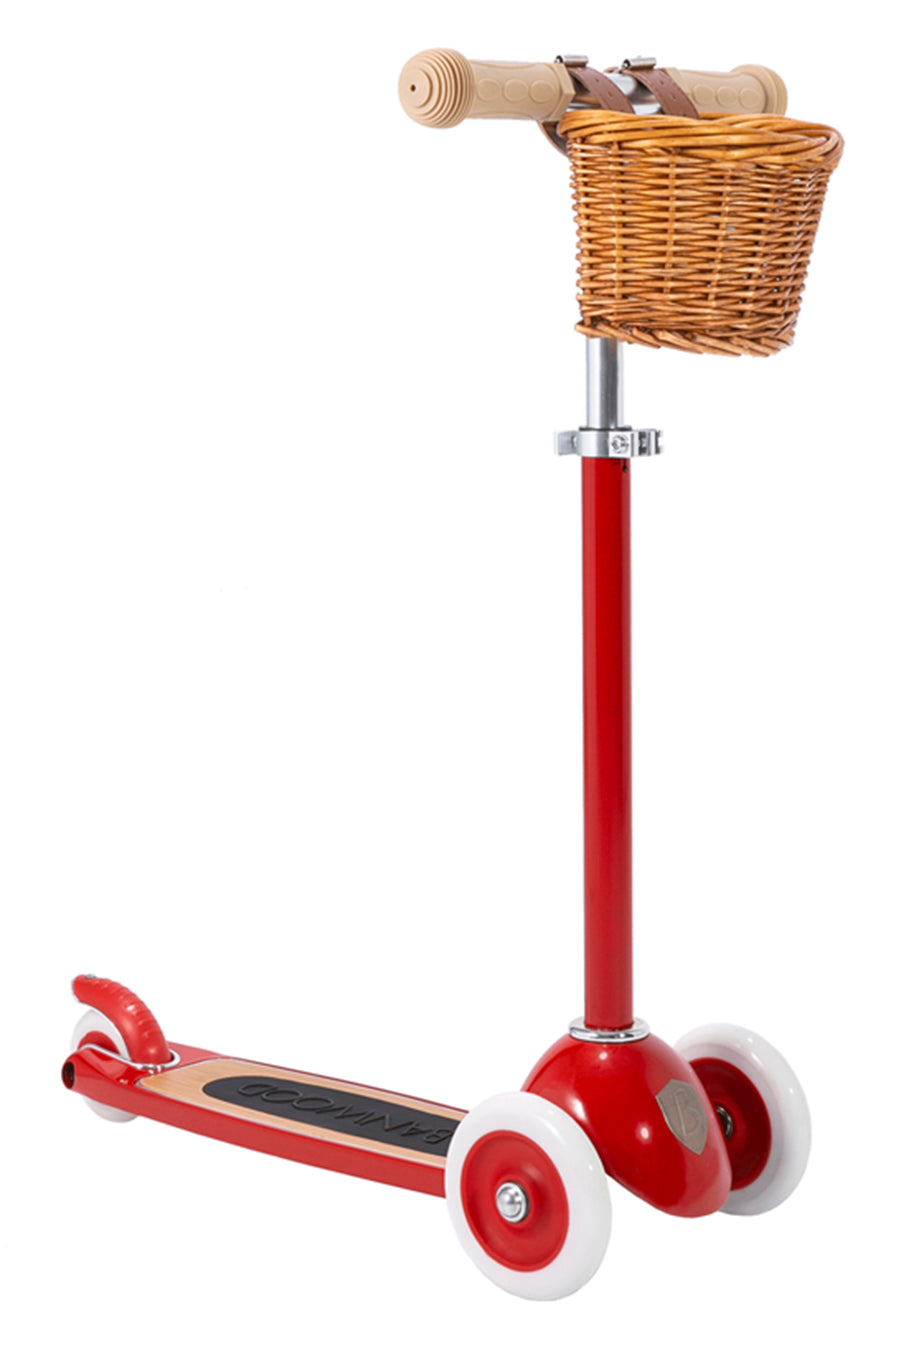 banwood-scooter-red.jpg